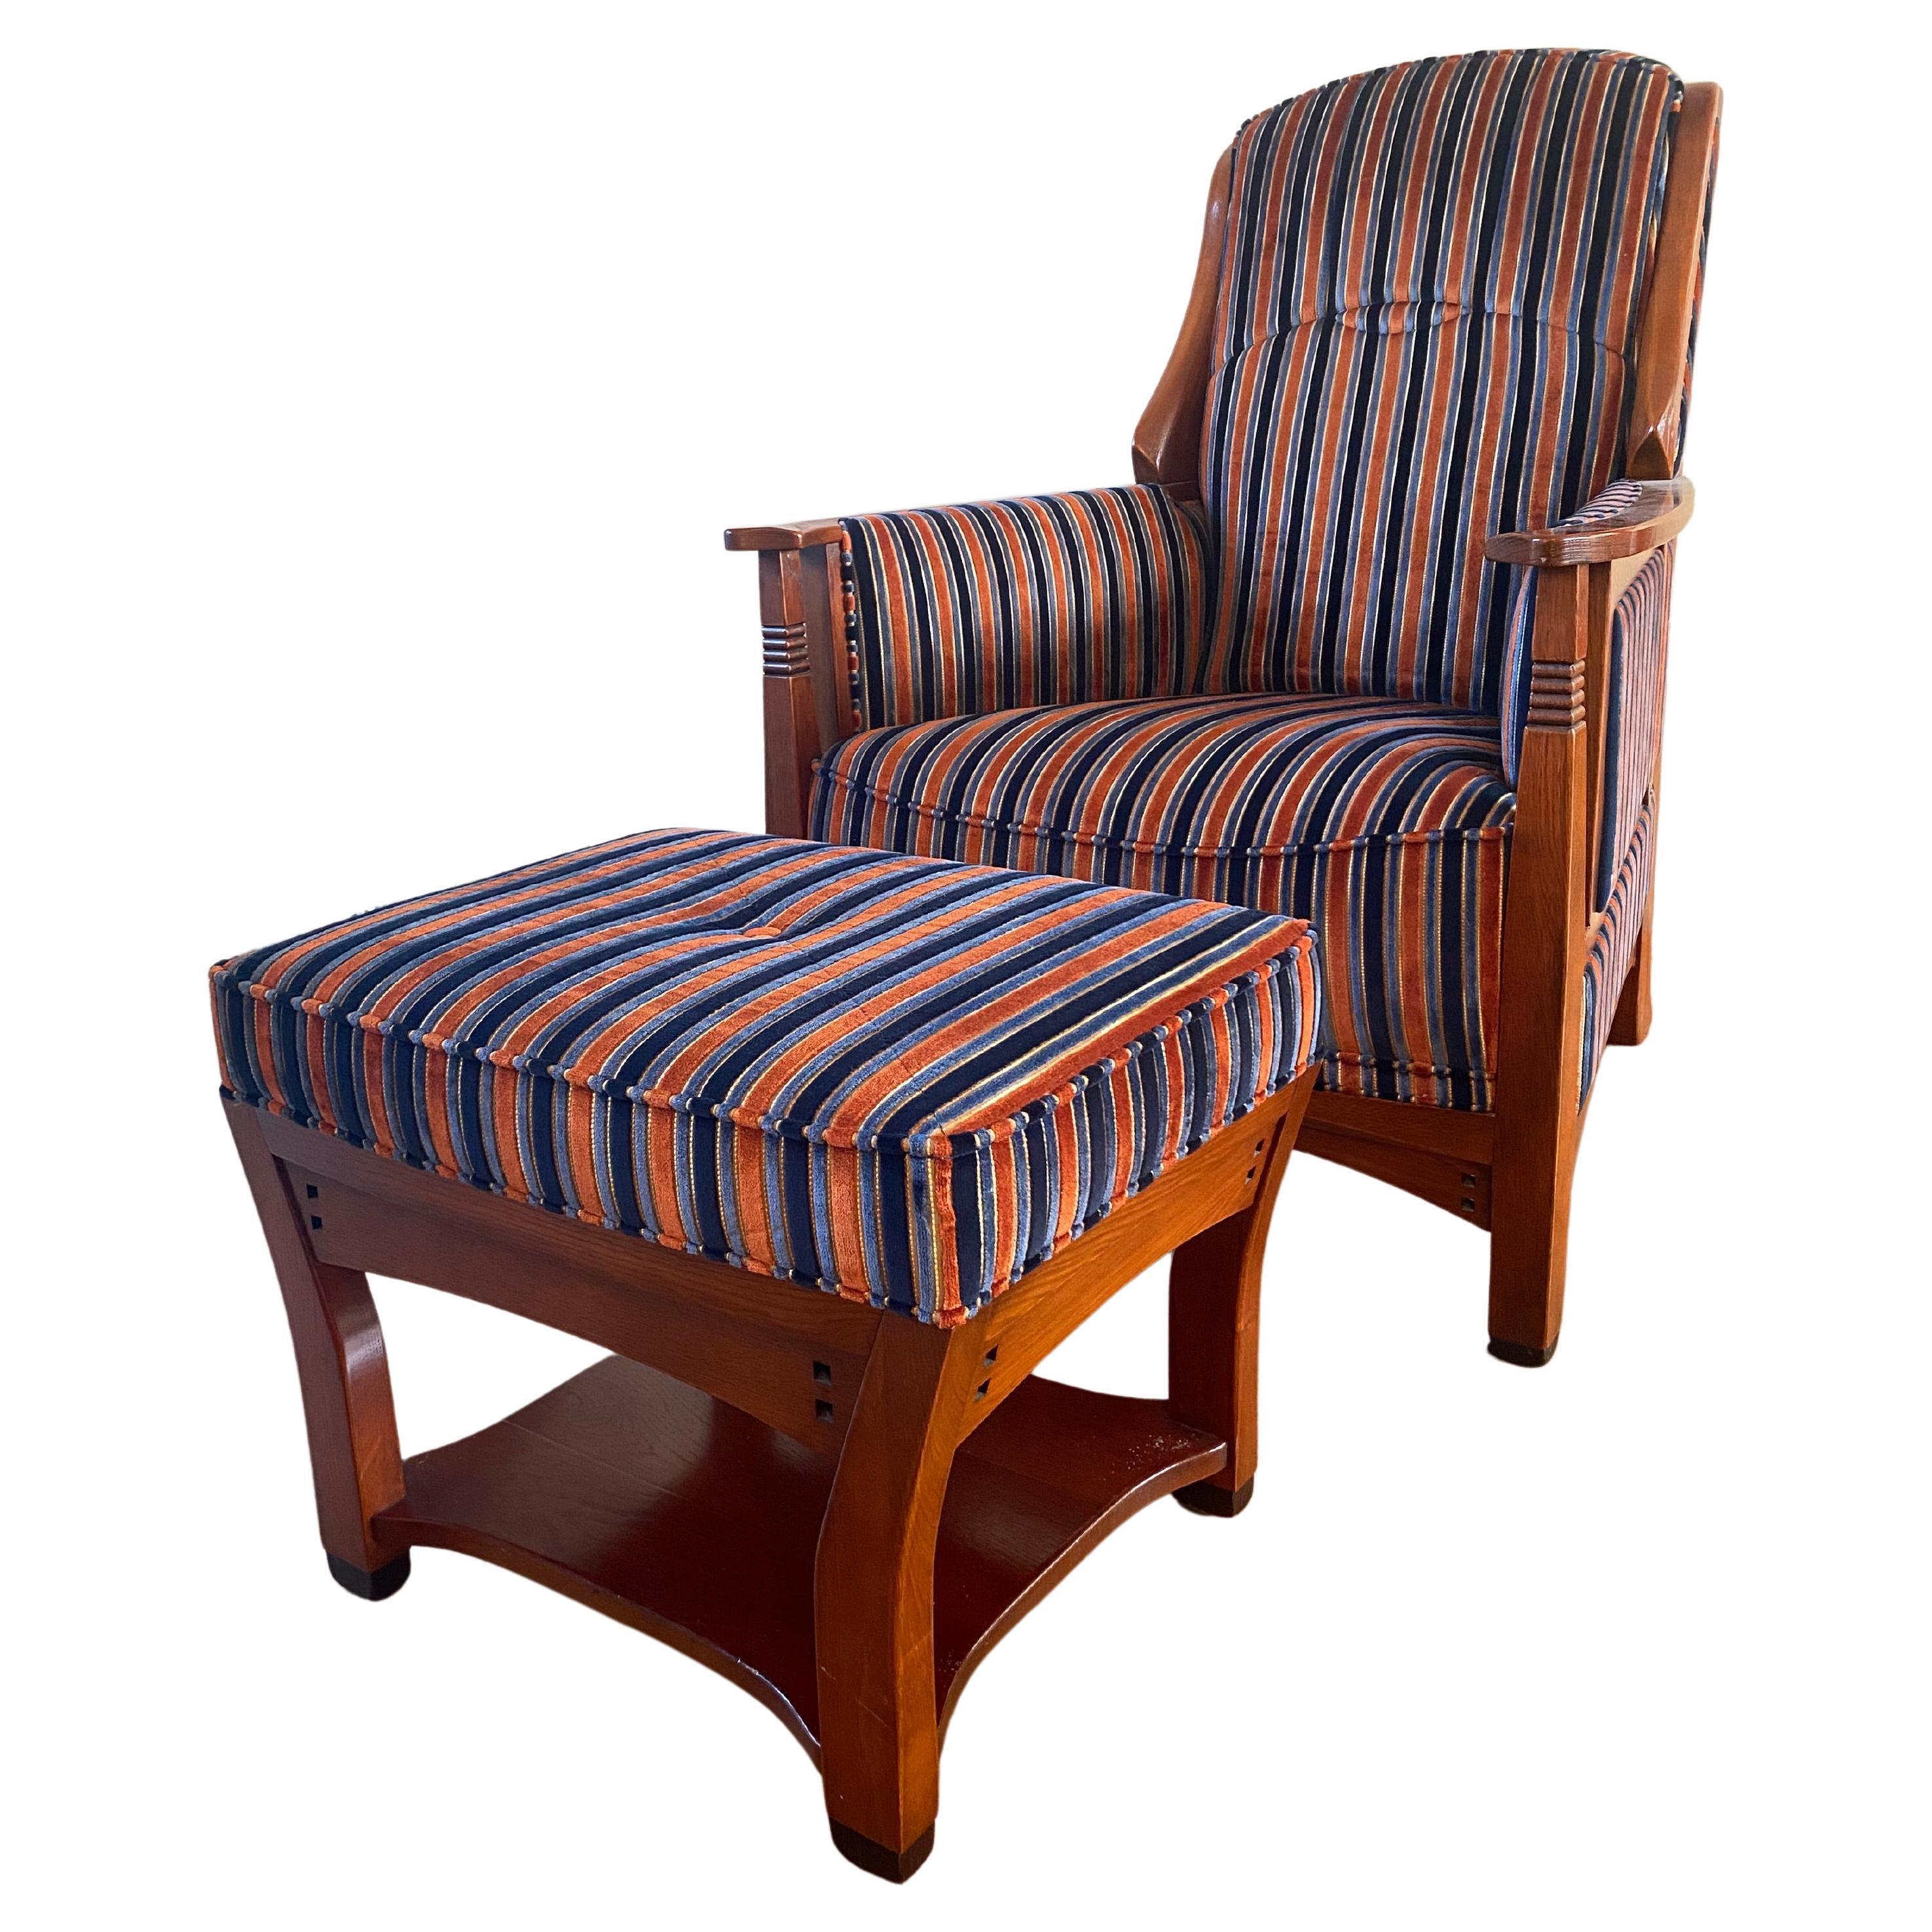 Exclusive Art Deco Style Lounge Chair With Footstool By Schuitema, Model Horta. For Sale 8